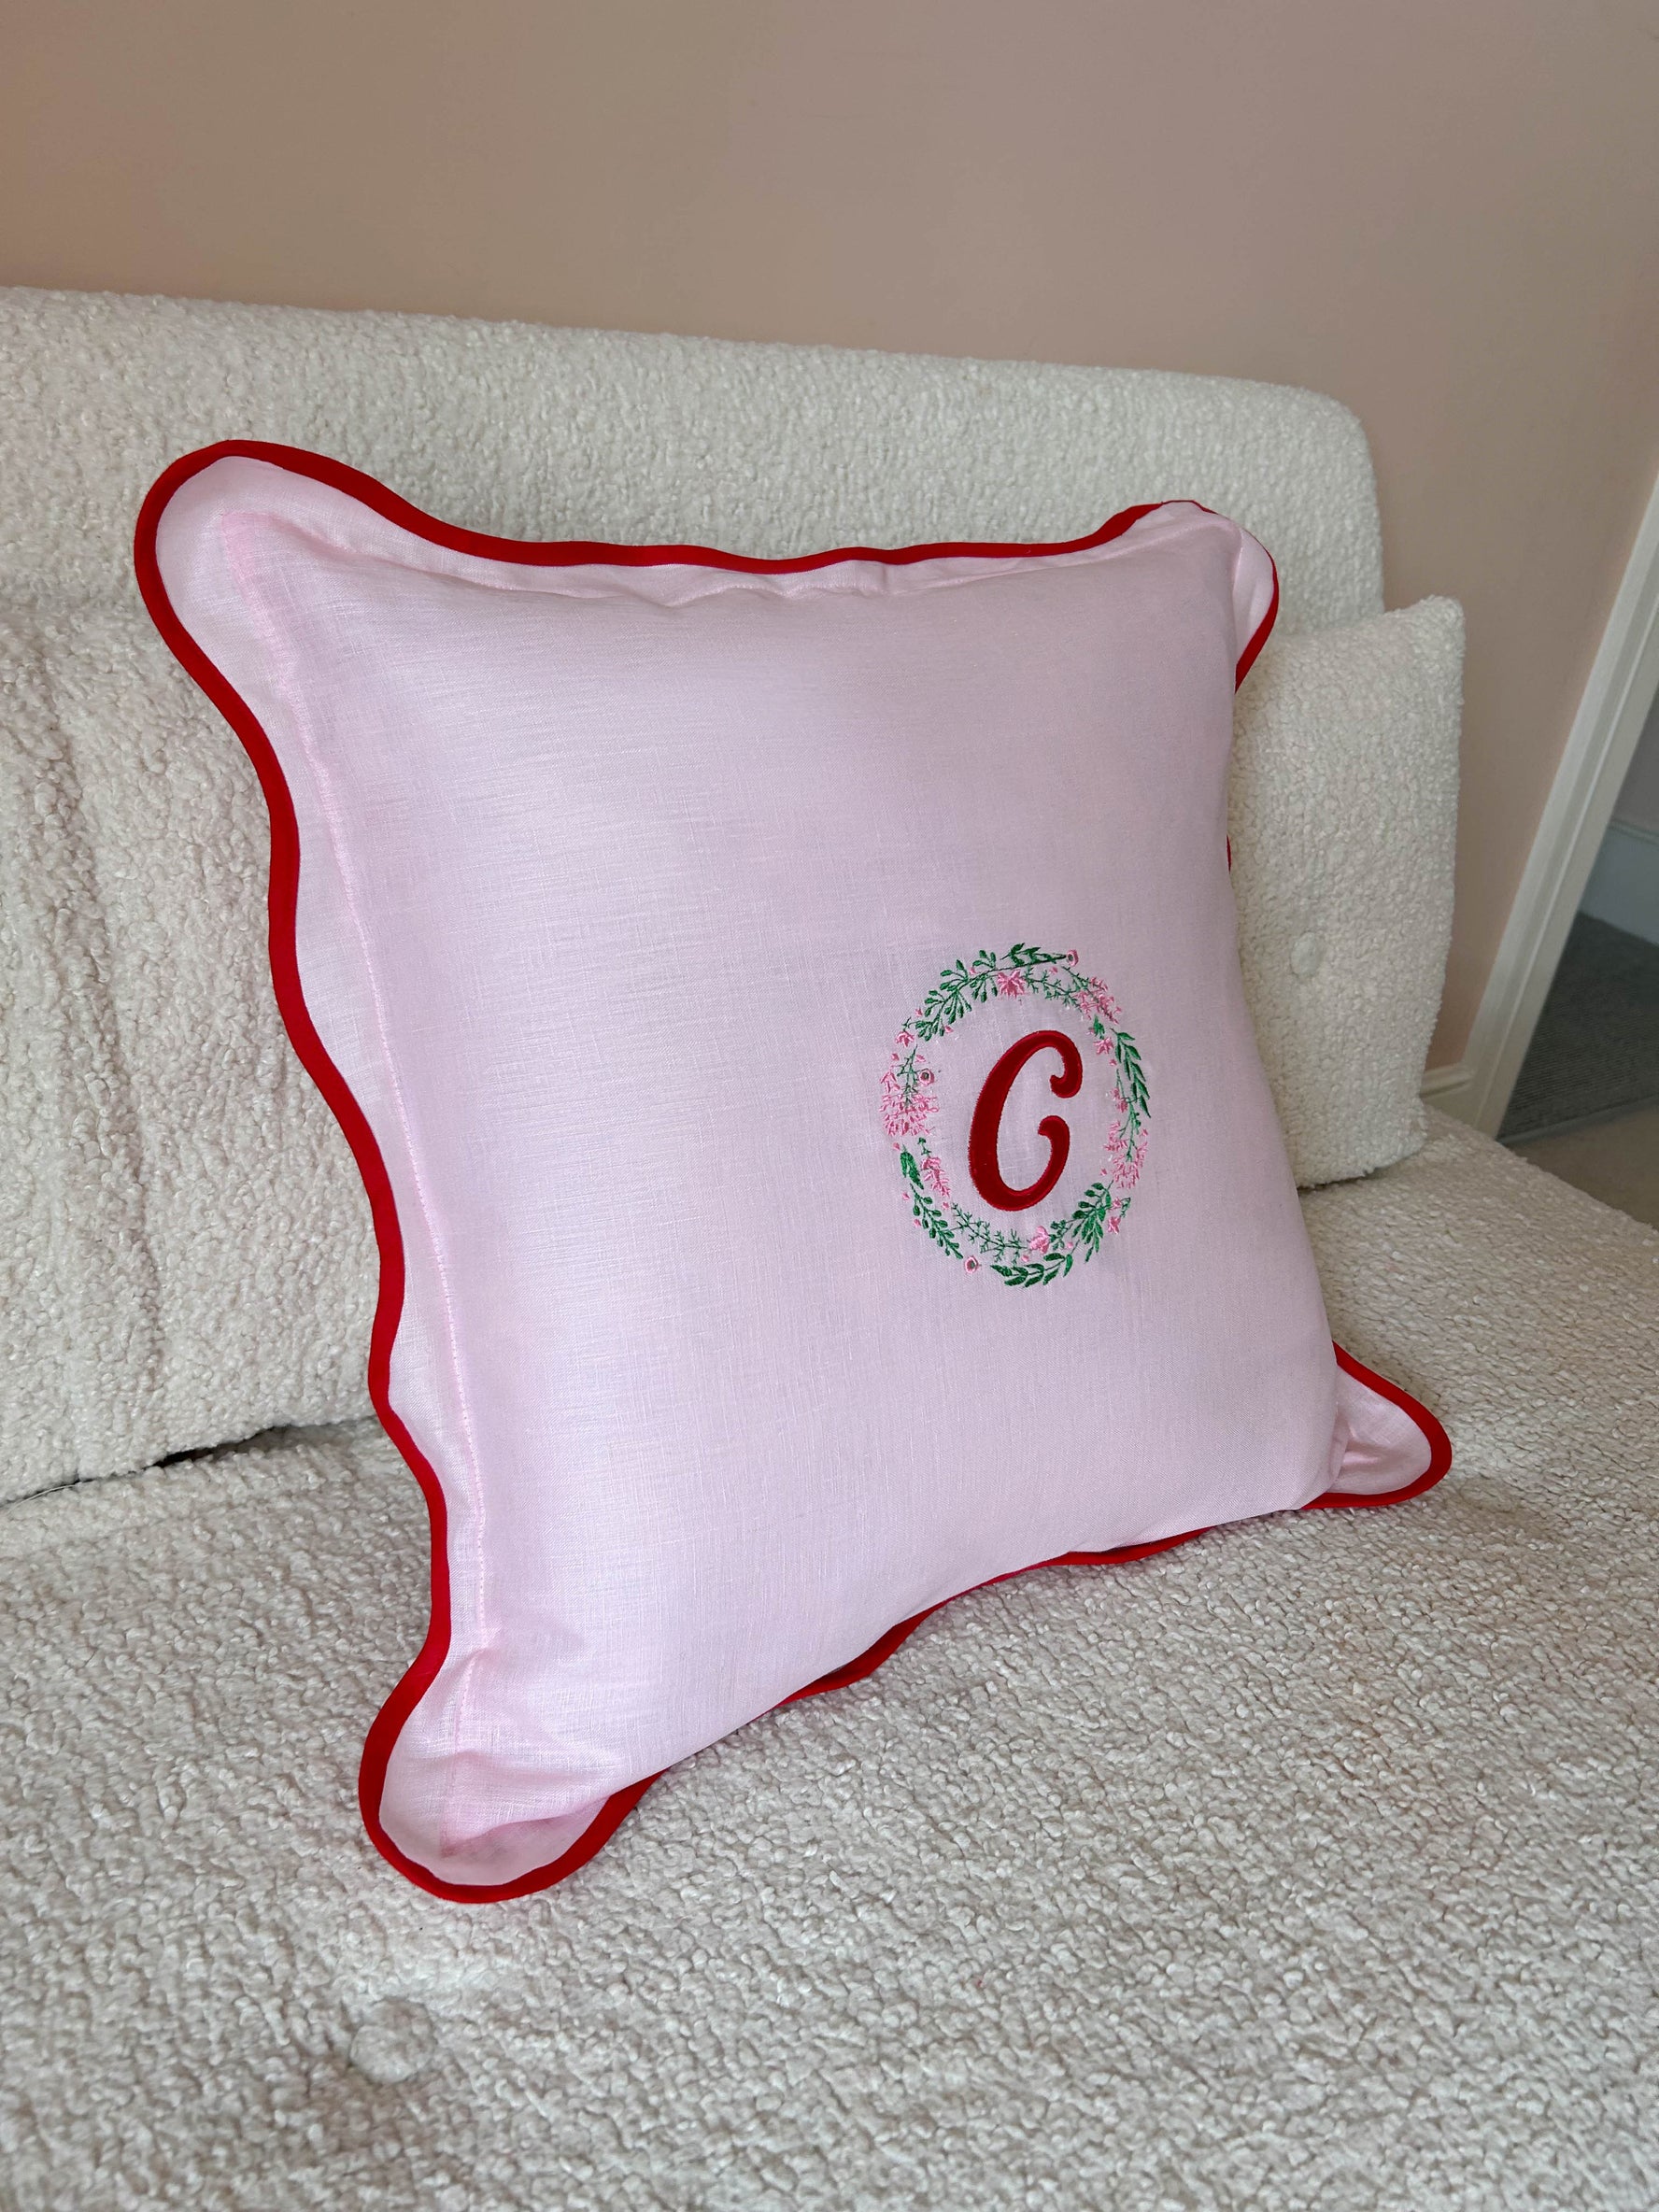 Red & Pink Scalloped Linen Embroidered Pillow - Floral Monograme